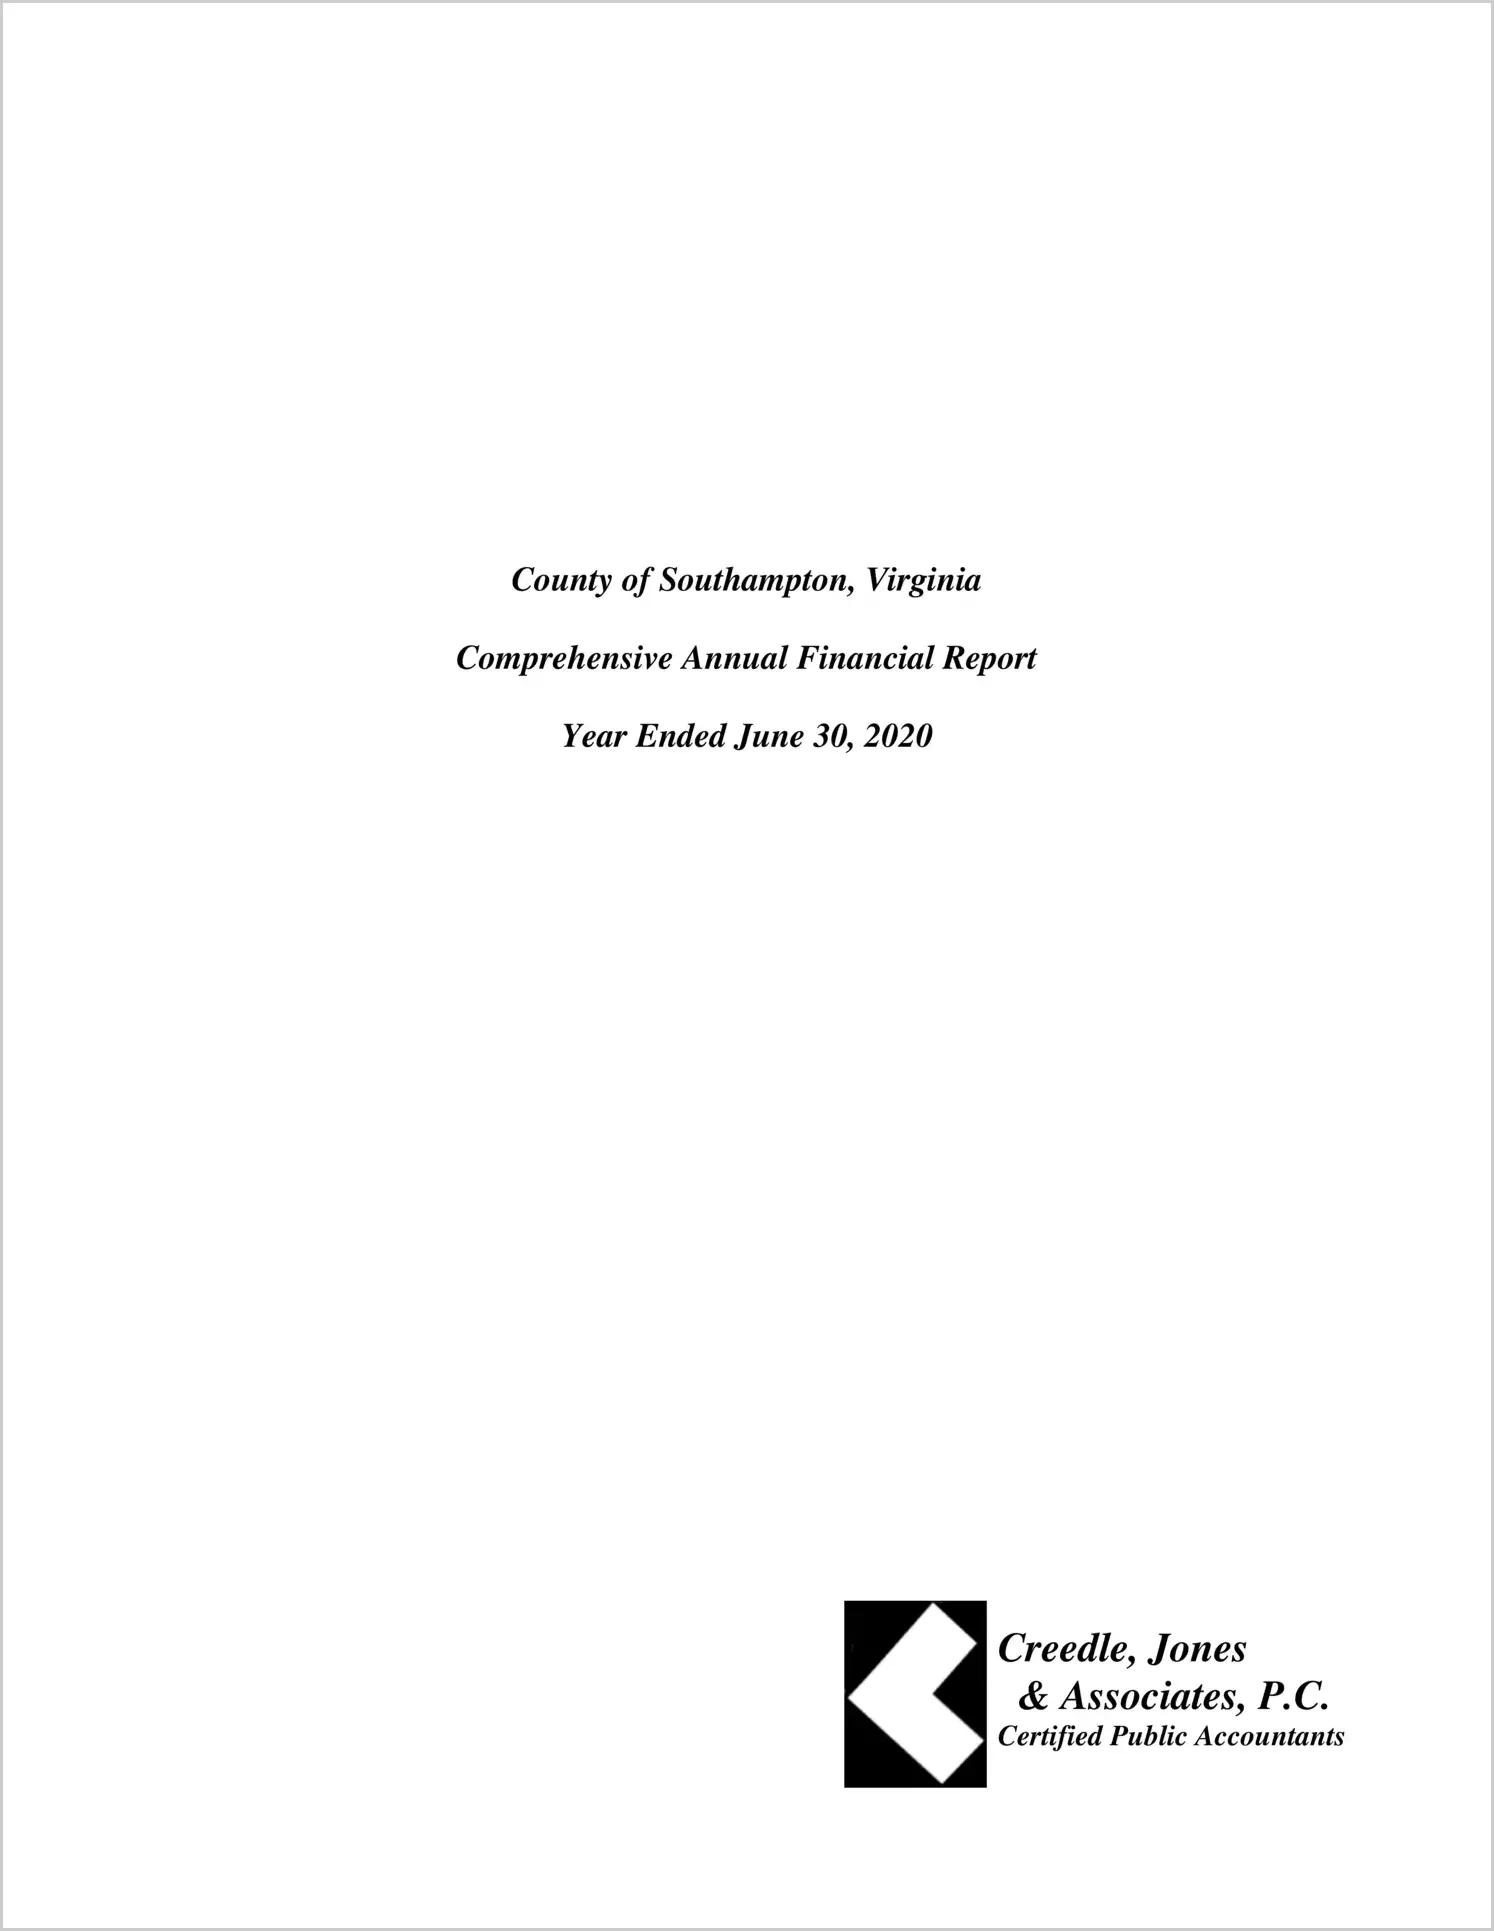 2020 Annual Financial Report for County of Southampton